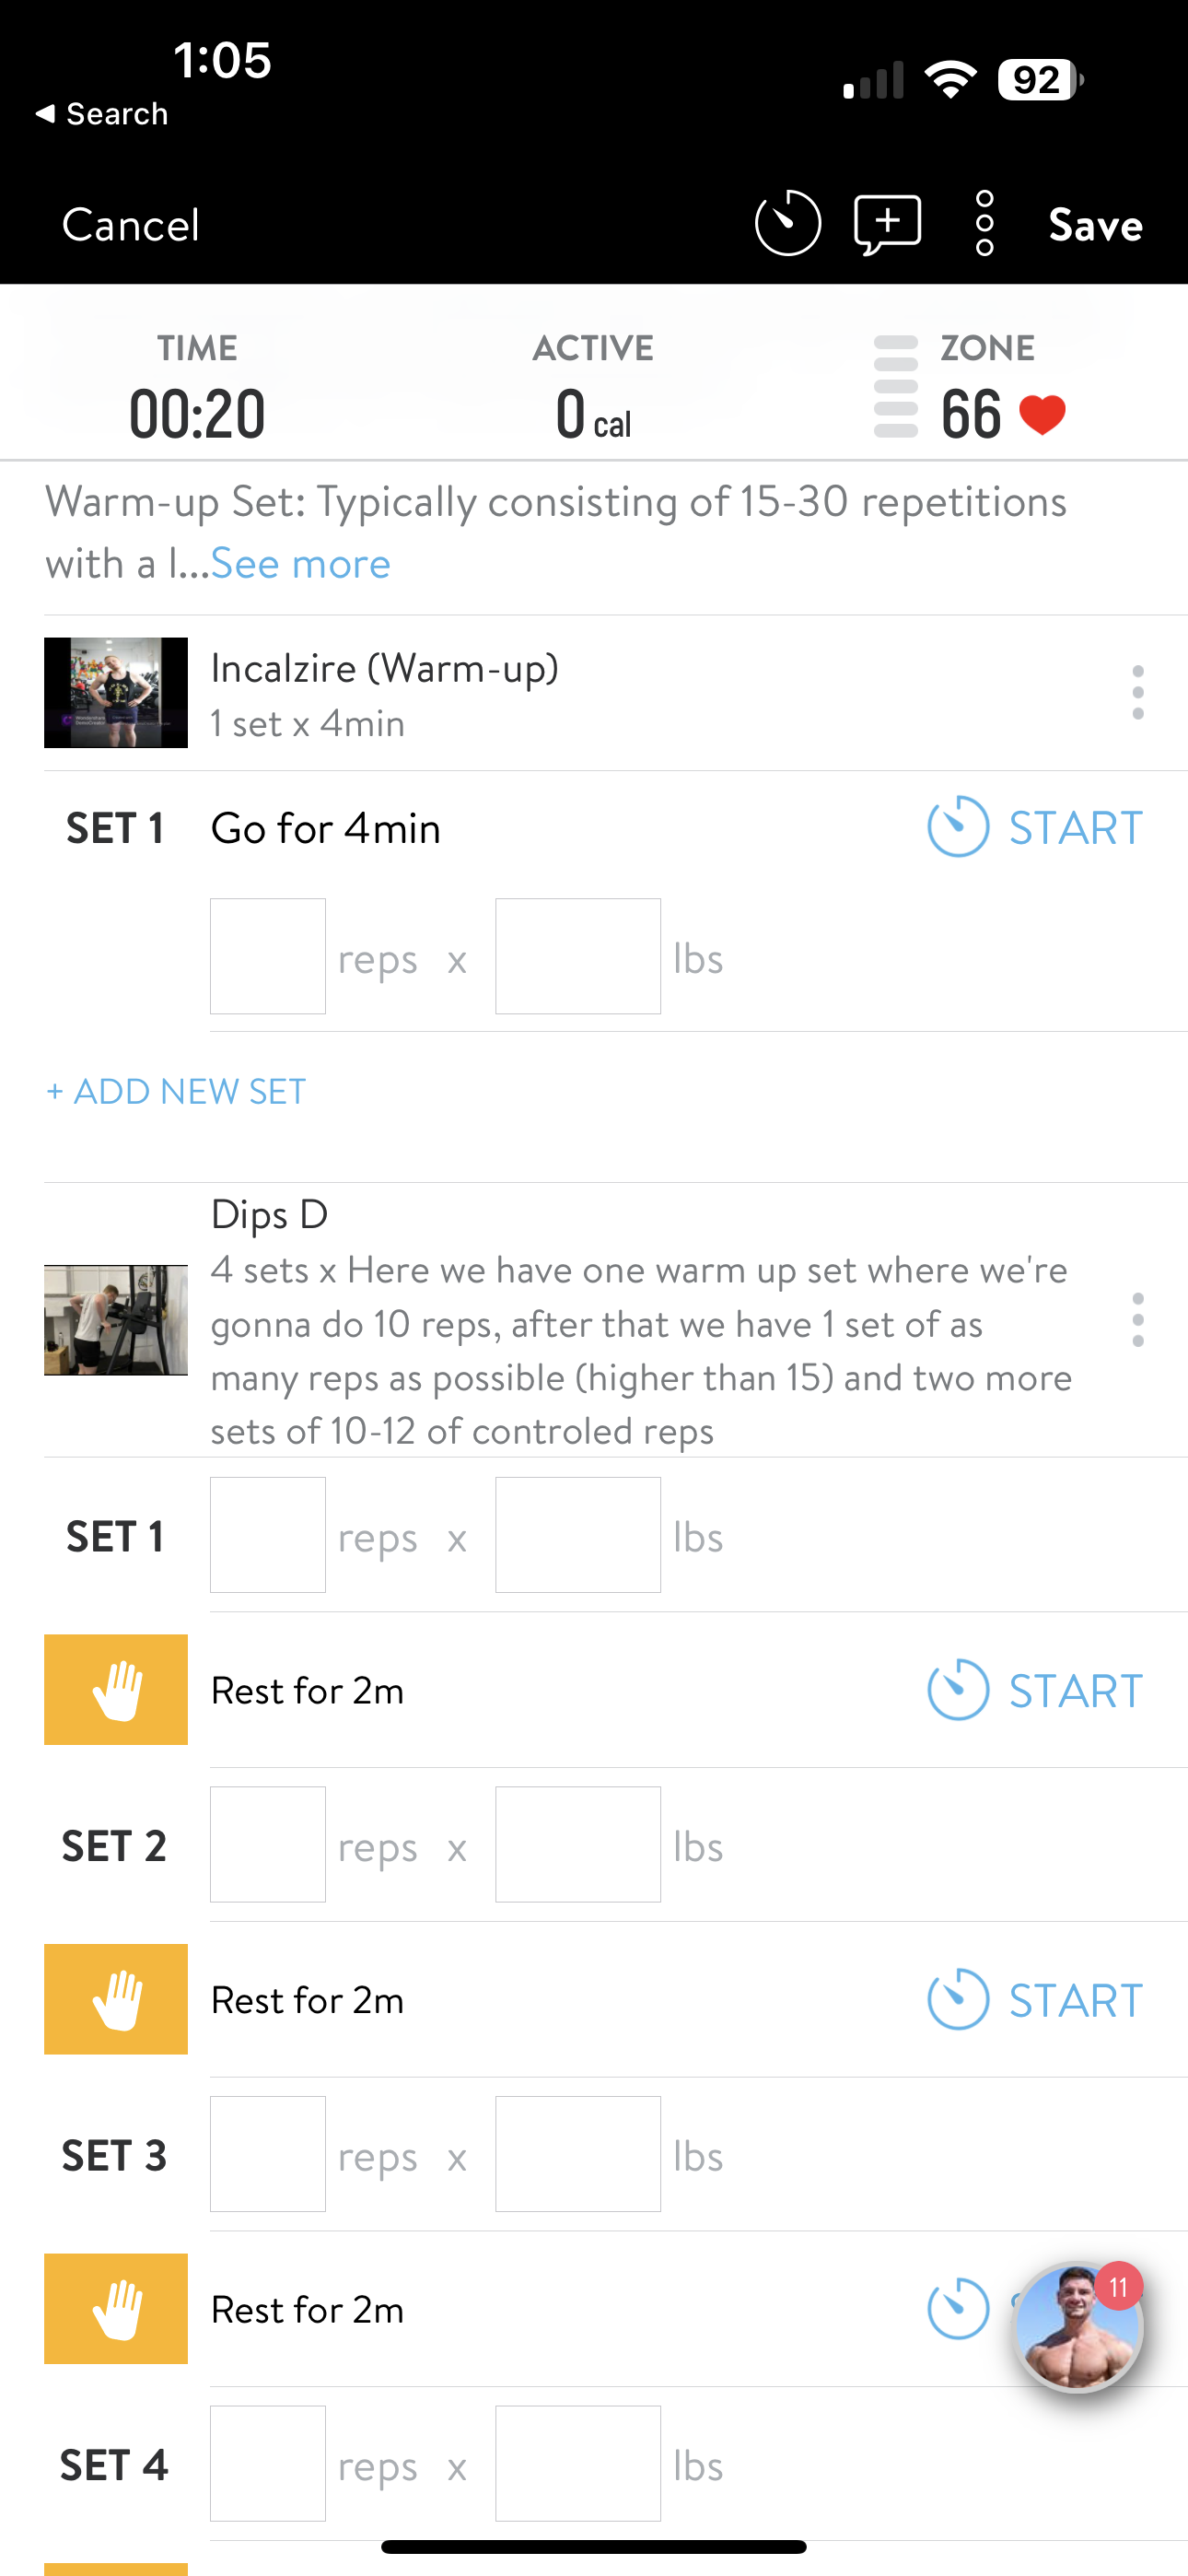 ADF Fitness - Online Personal Training Gym App